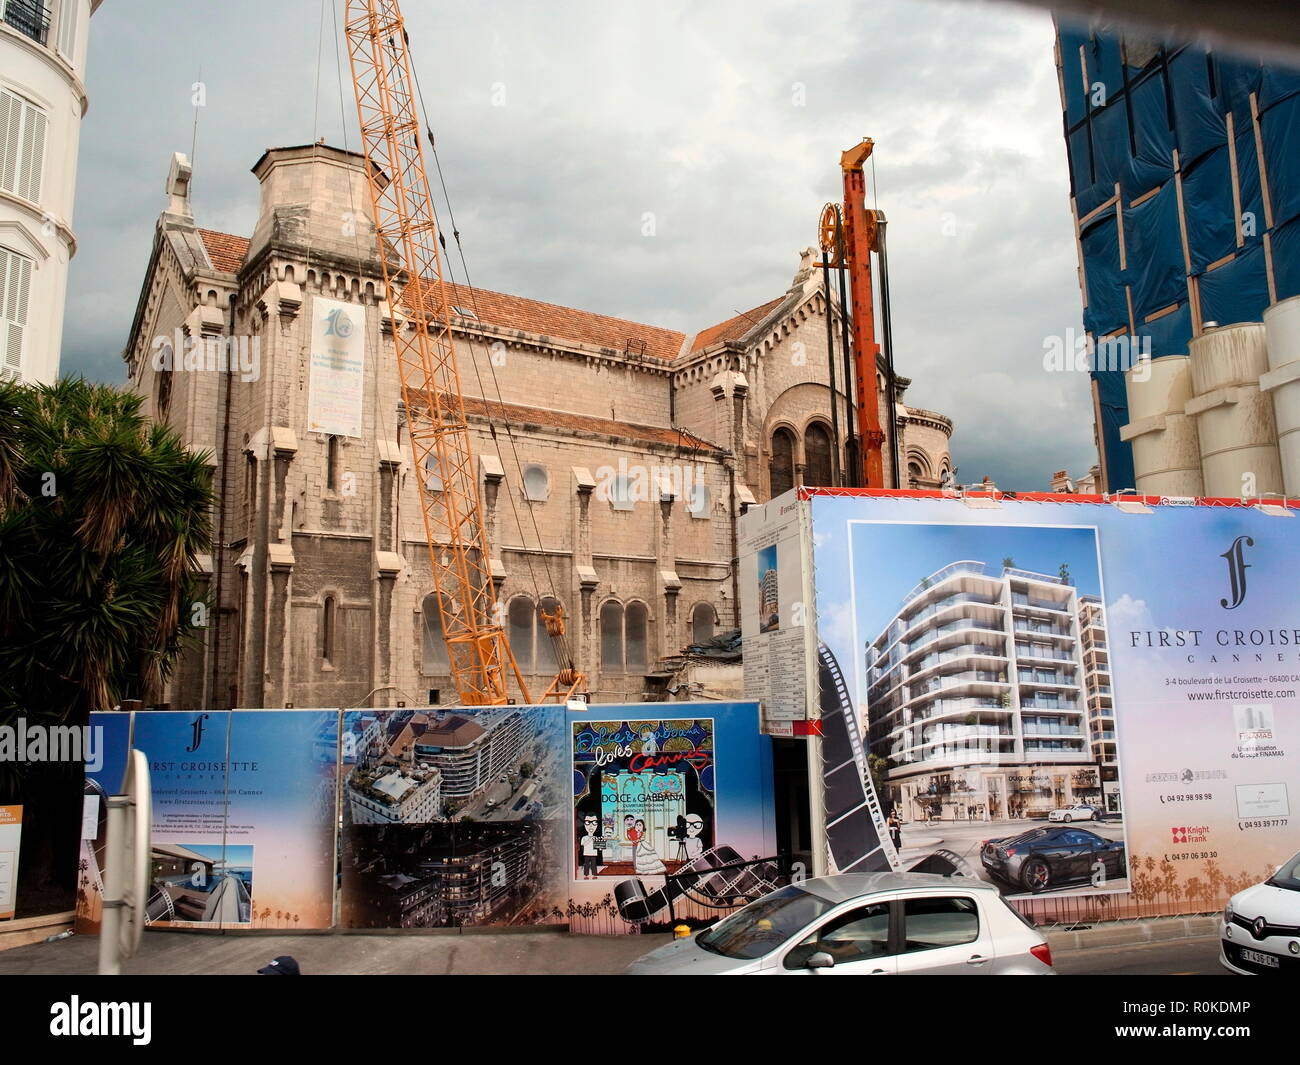 AJAXNETPHOTO. 2018. CANNES, FRANCE. - COTE D'AZUR RESORT - NEW BUILDING - SITE OF THE FIRST CROISETTE APARTMENT AND SHOPPING PROPERTY BEING DEVELOPED IN FRONT OF THE CHURCH EGLISE NOTRE DAME DE BON VOYAGE OVERLOOKING THE BOULEVARD DE LA CROISETTE. PHOTO:JONATHAN EASTLAND/AJAX REF:GXR180310 676 Stock Photo